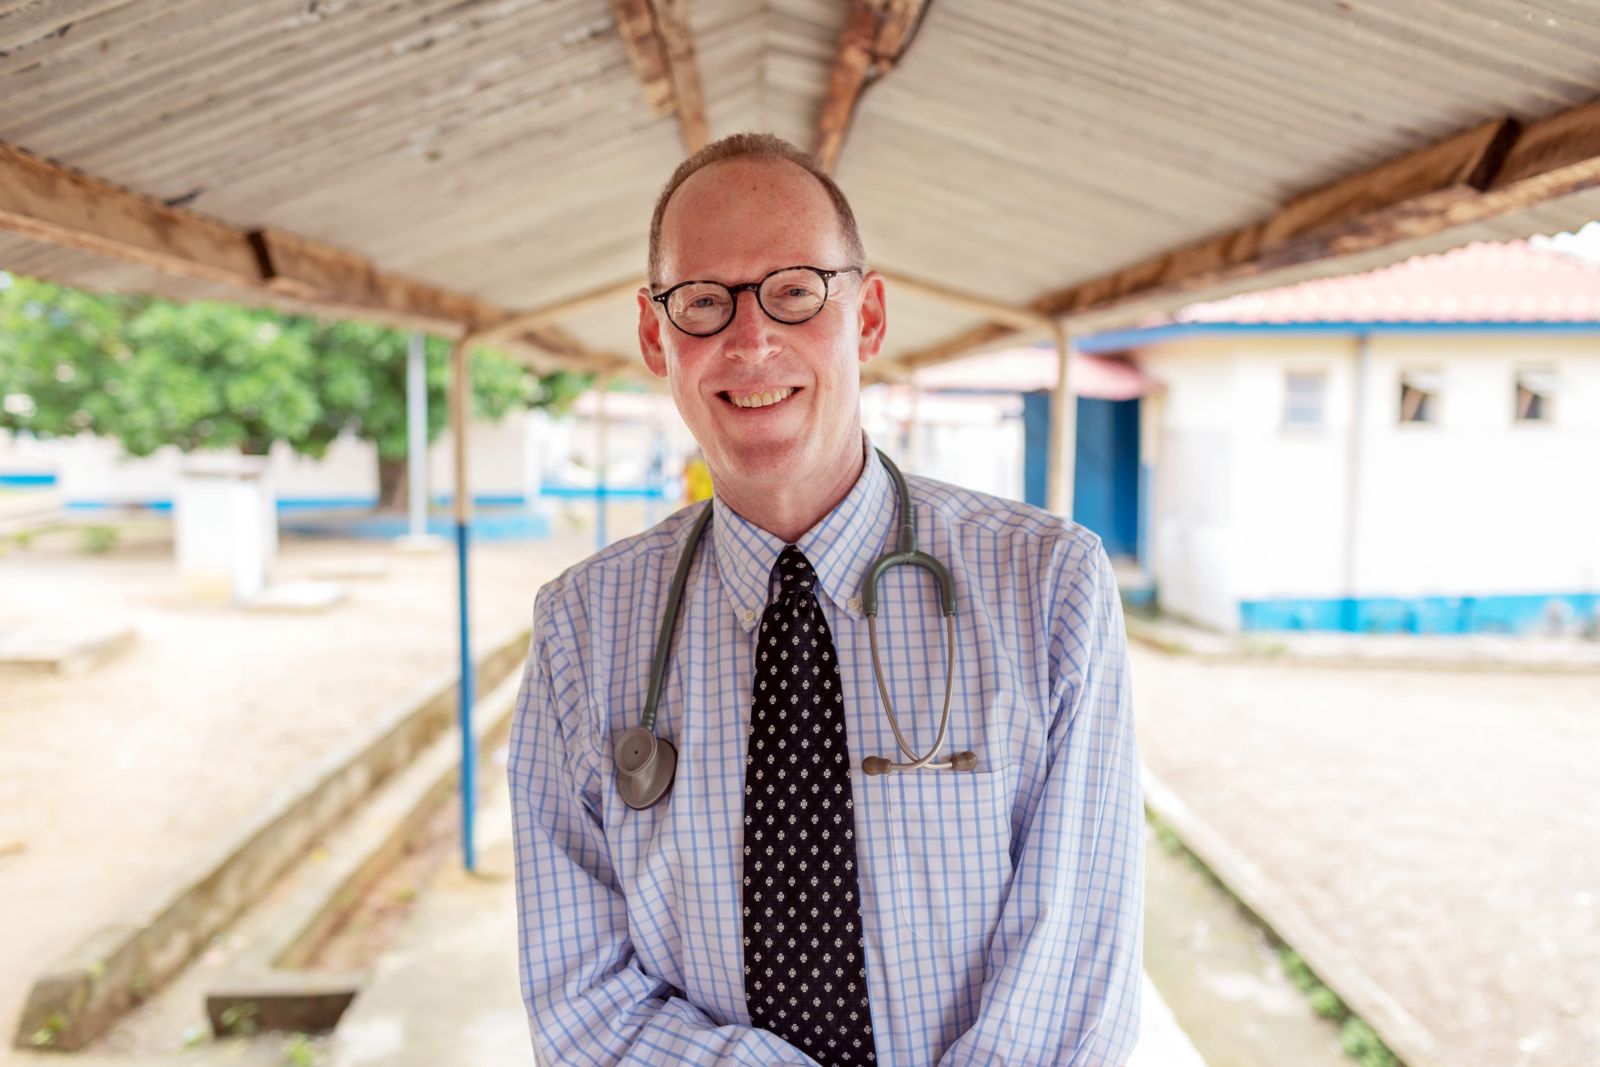 Reflections on Paul Farmer’s legacy: a clarion call for transformative human rights praxis in global health